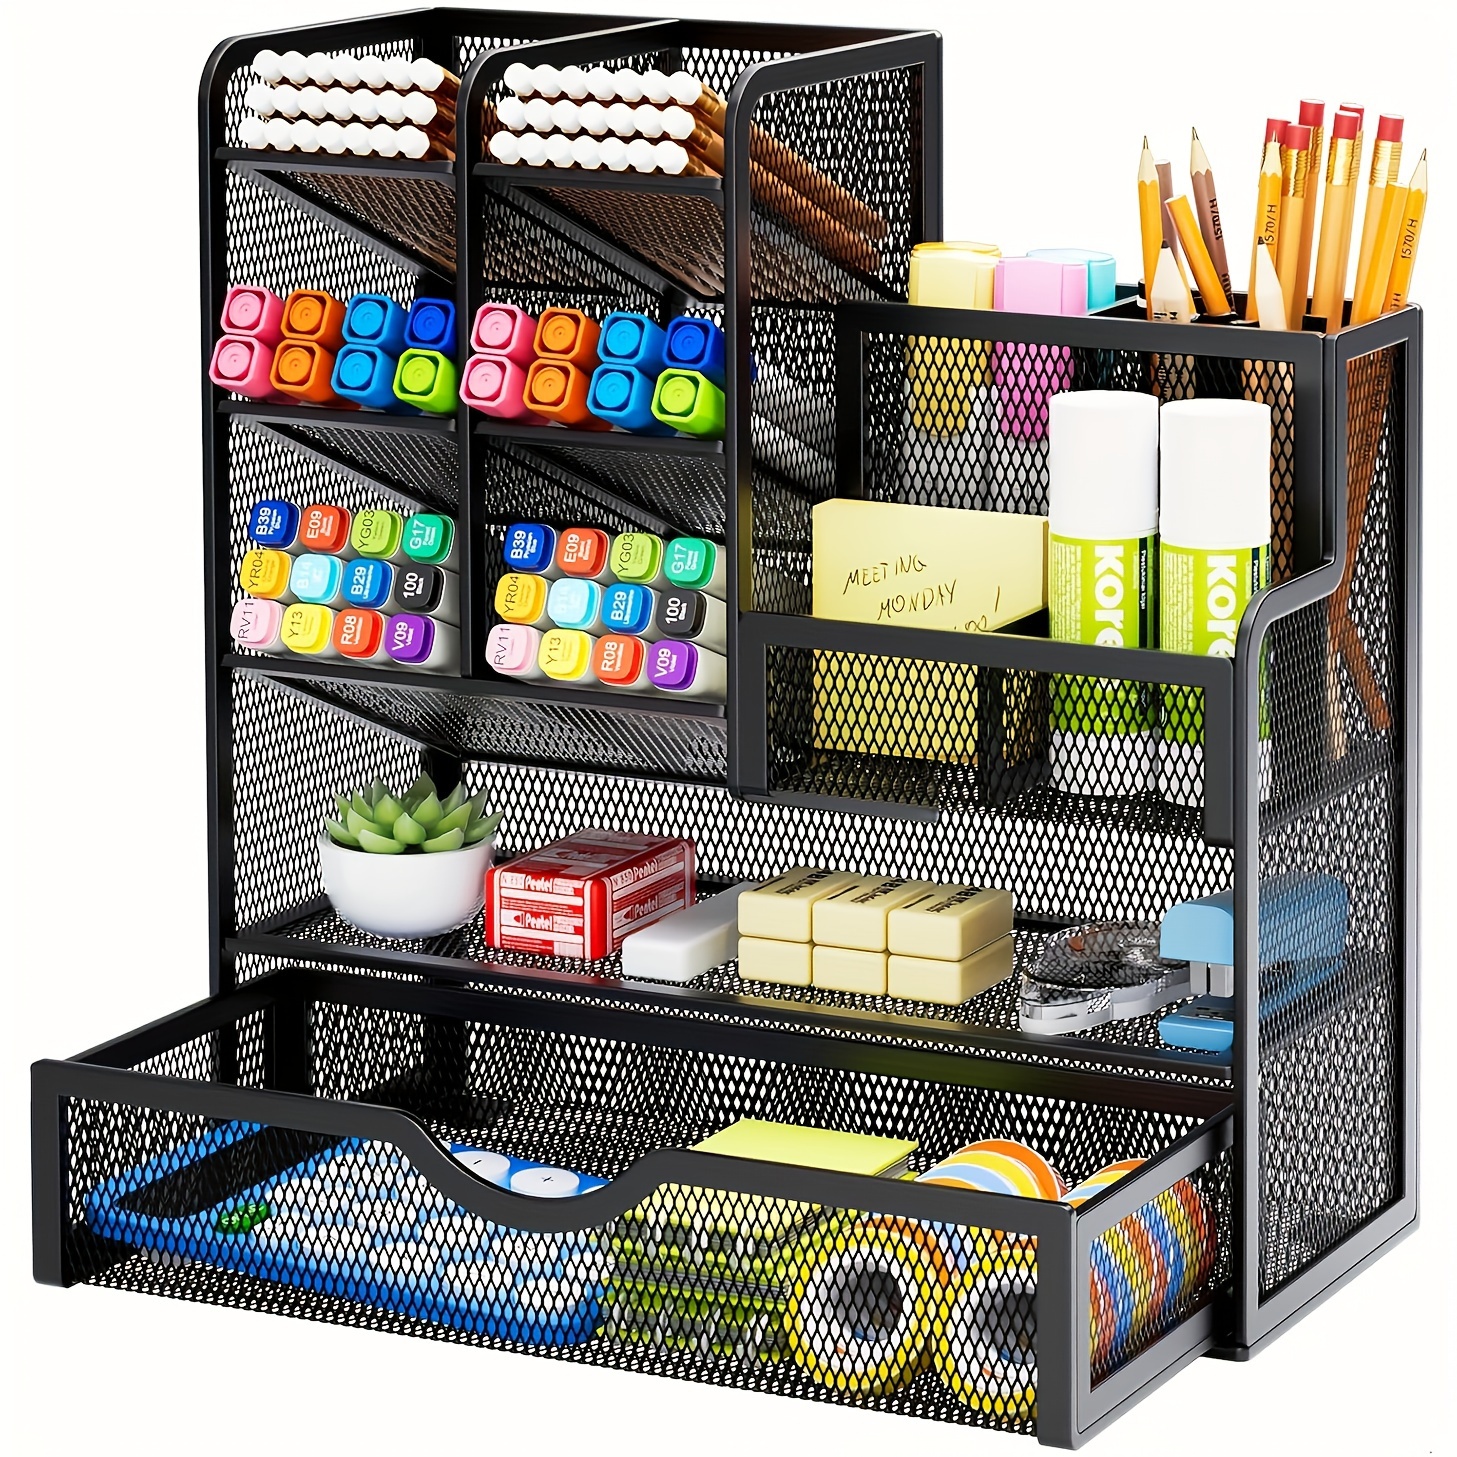 

Jmhud Versatile Pencil Organizer, Mesh Pen Holder For Desk, Enhanced Desk Organizer With Drawer, Desk Organizers And Accessories For Office And Art Supplies (black)